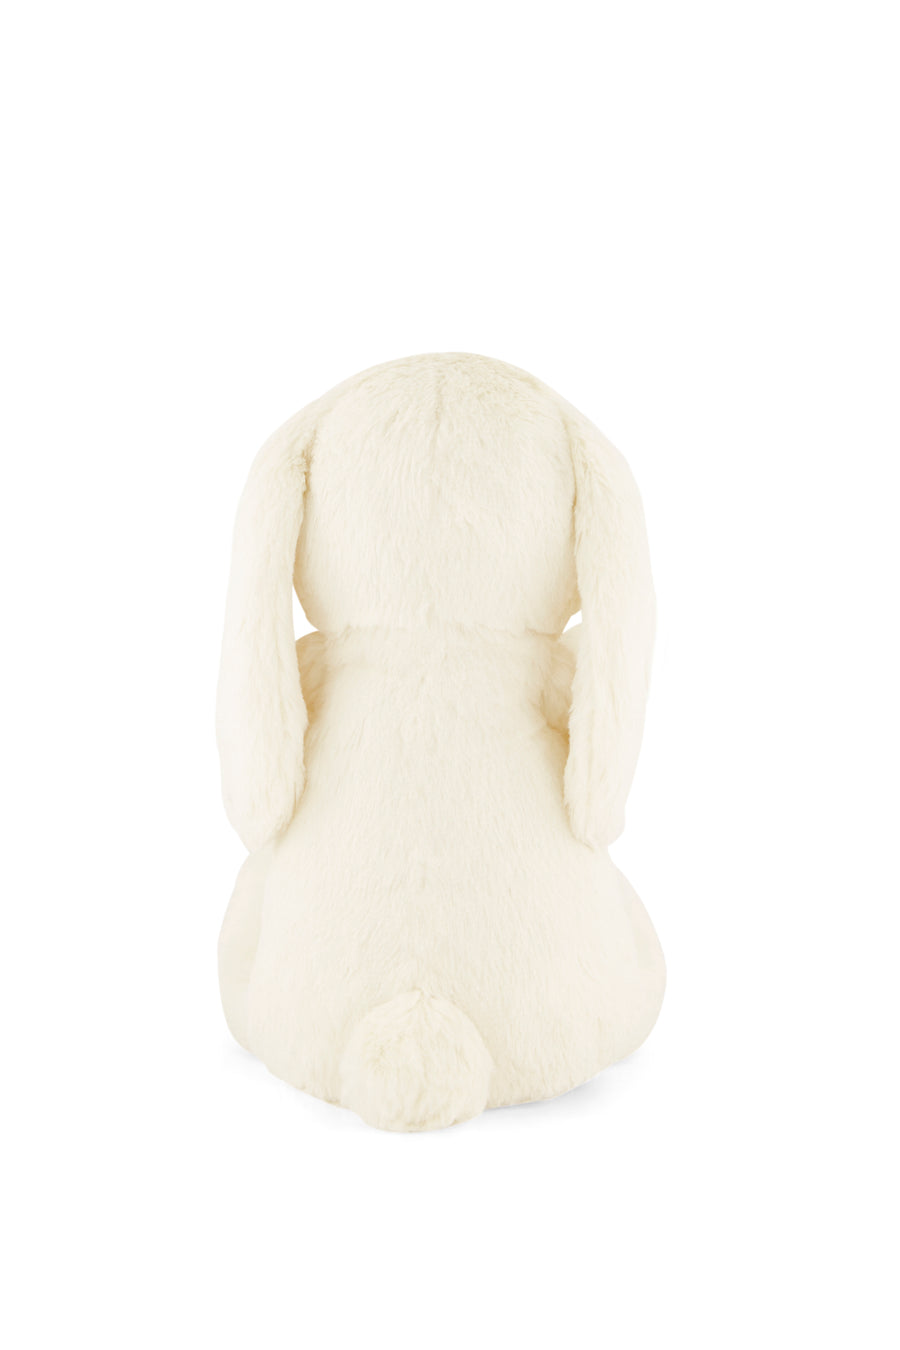 Snuggle Bunnies - Frankie the Hugging Bunny - Marshmallow Childrens Toy from Jamie Kay NZ